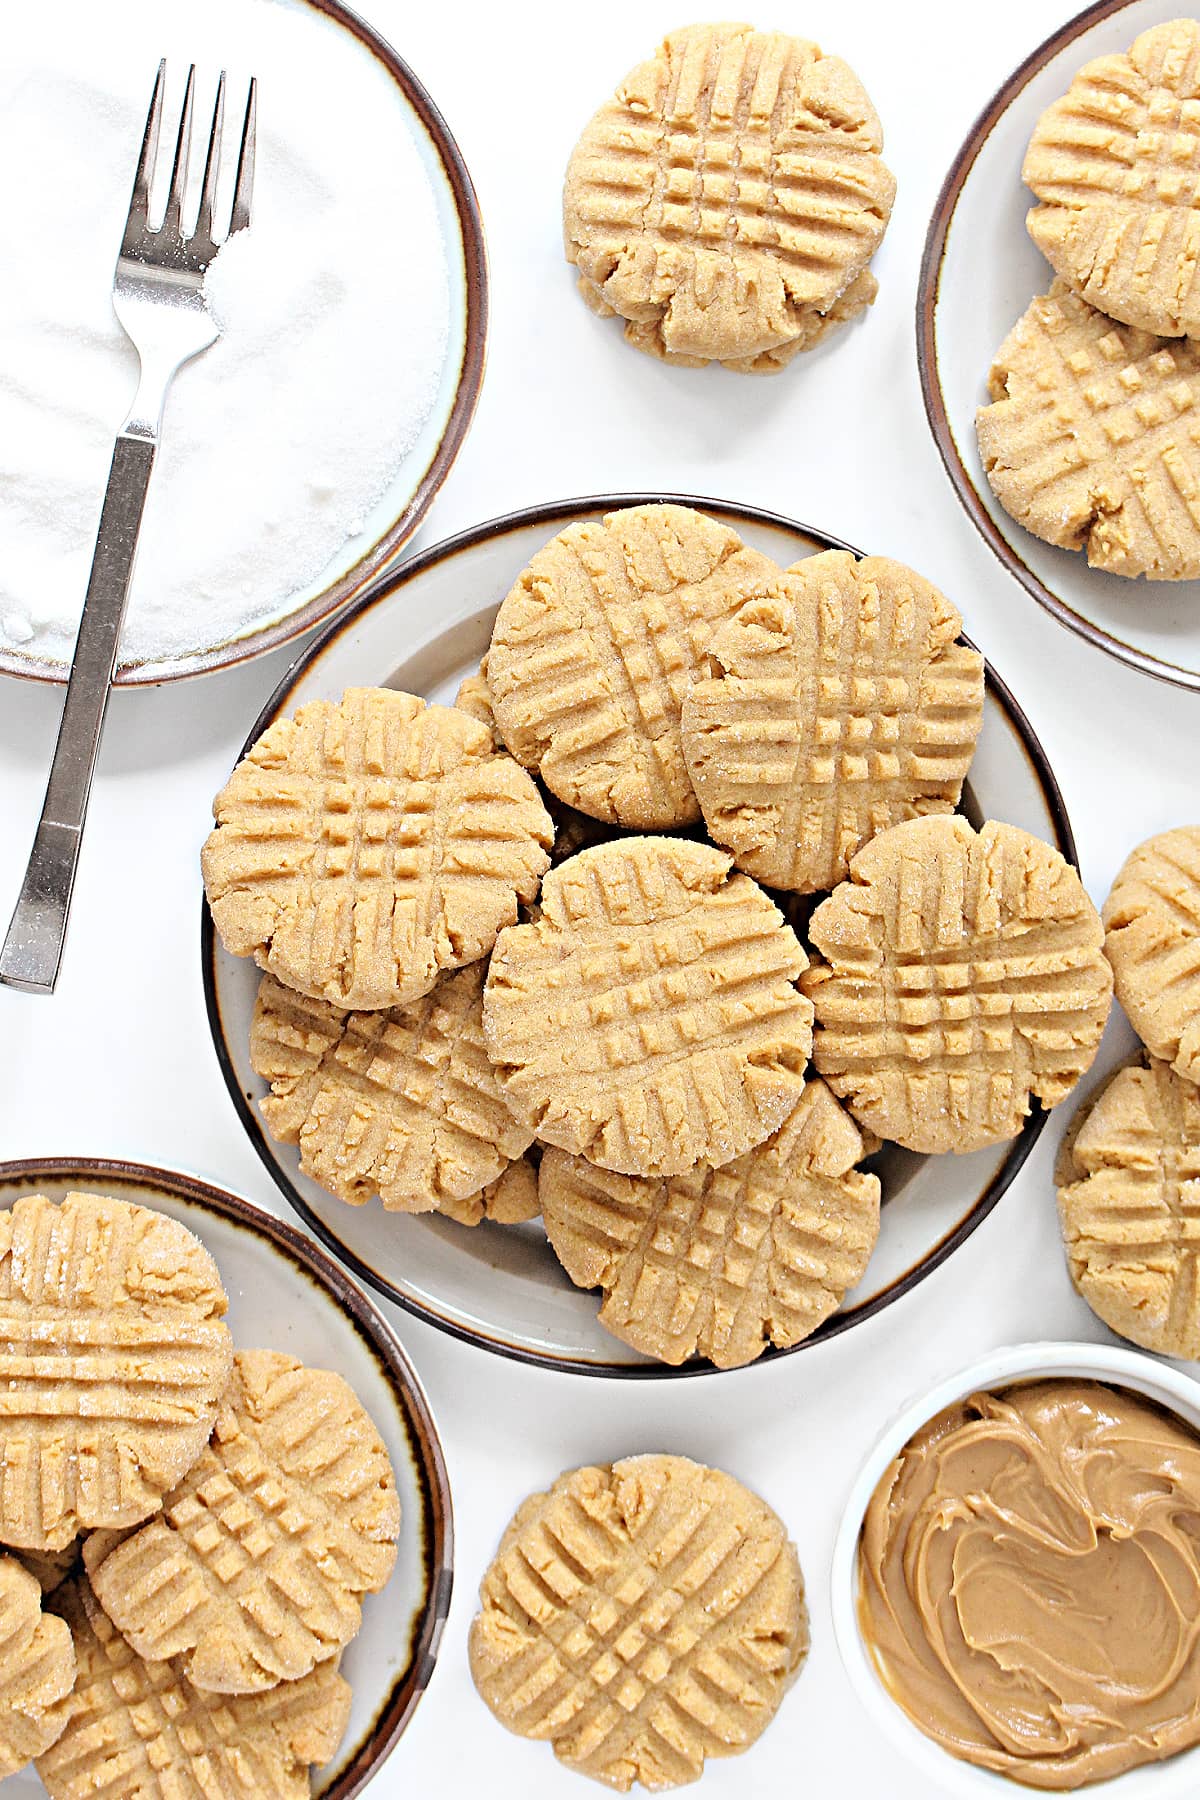 Peanut Butter Cookies with a criss cross pattern from a fork on top.